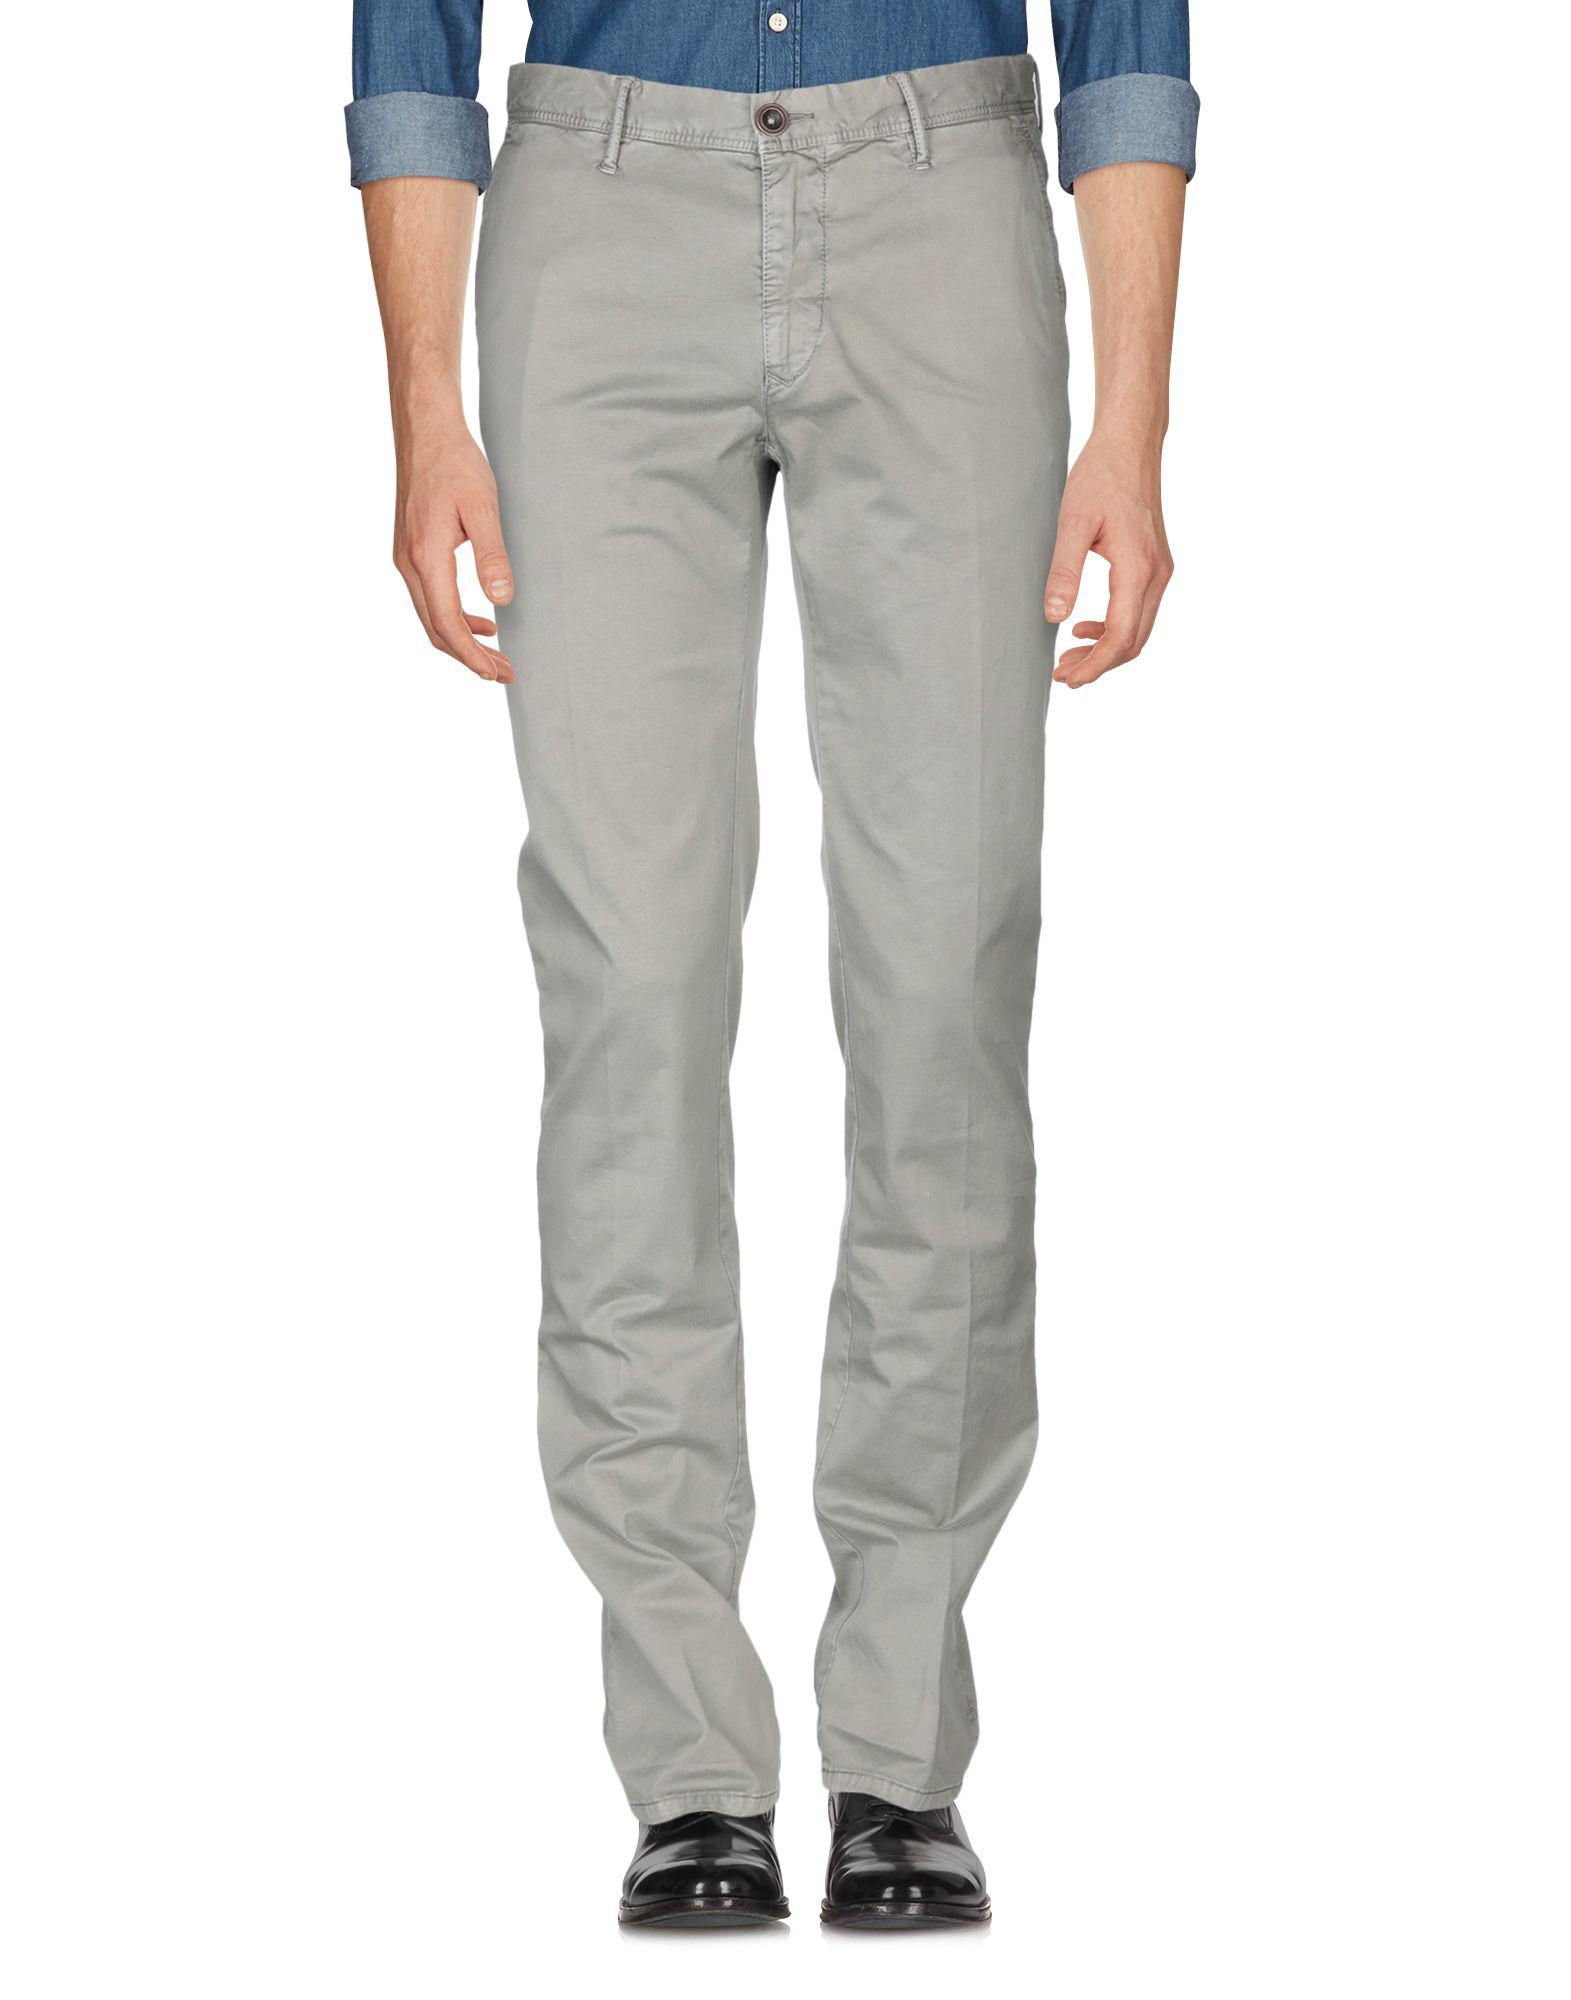 Incotex Cotton Casual Pants in Light Grey (Gray) for Men - Lyst